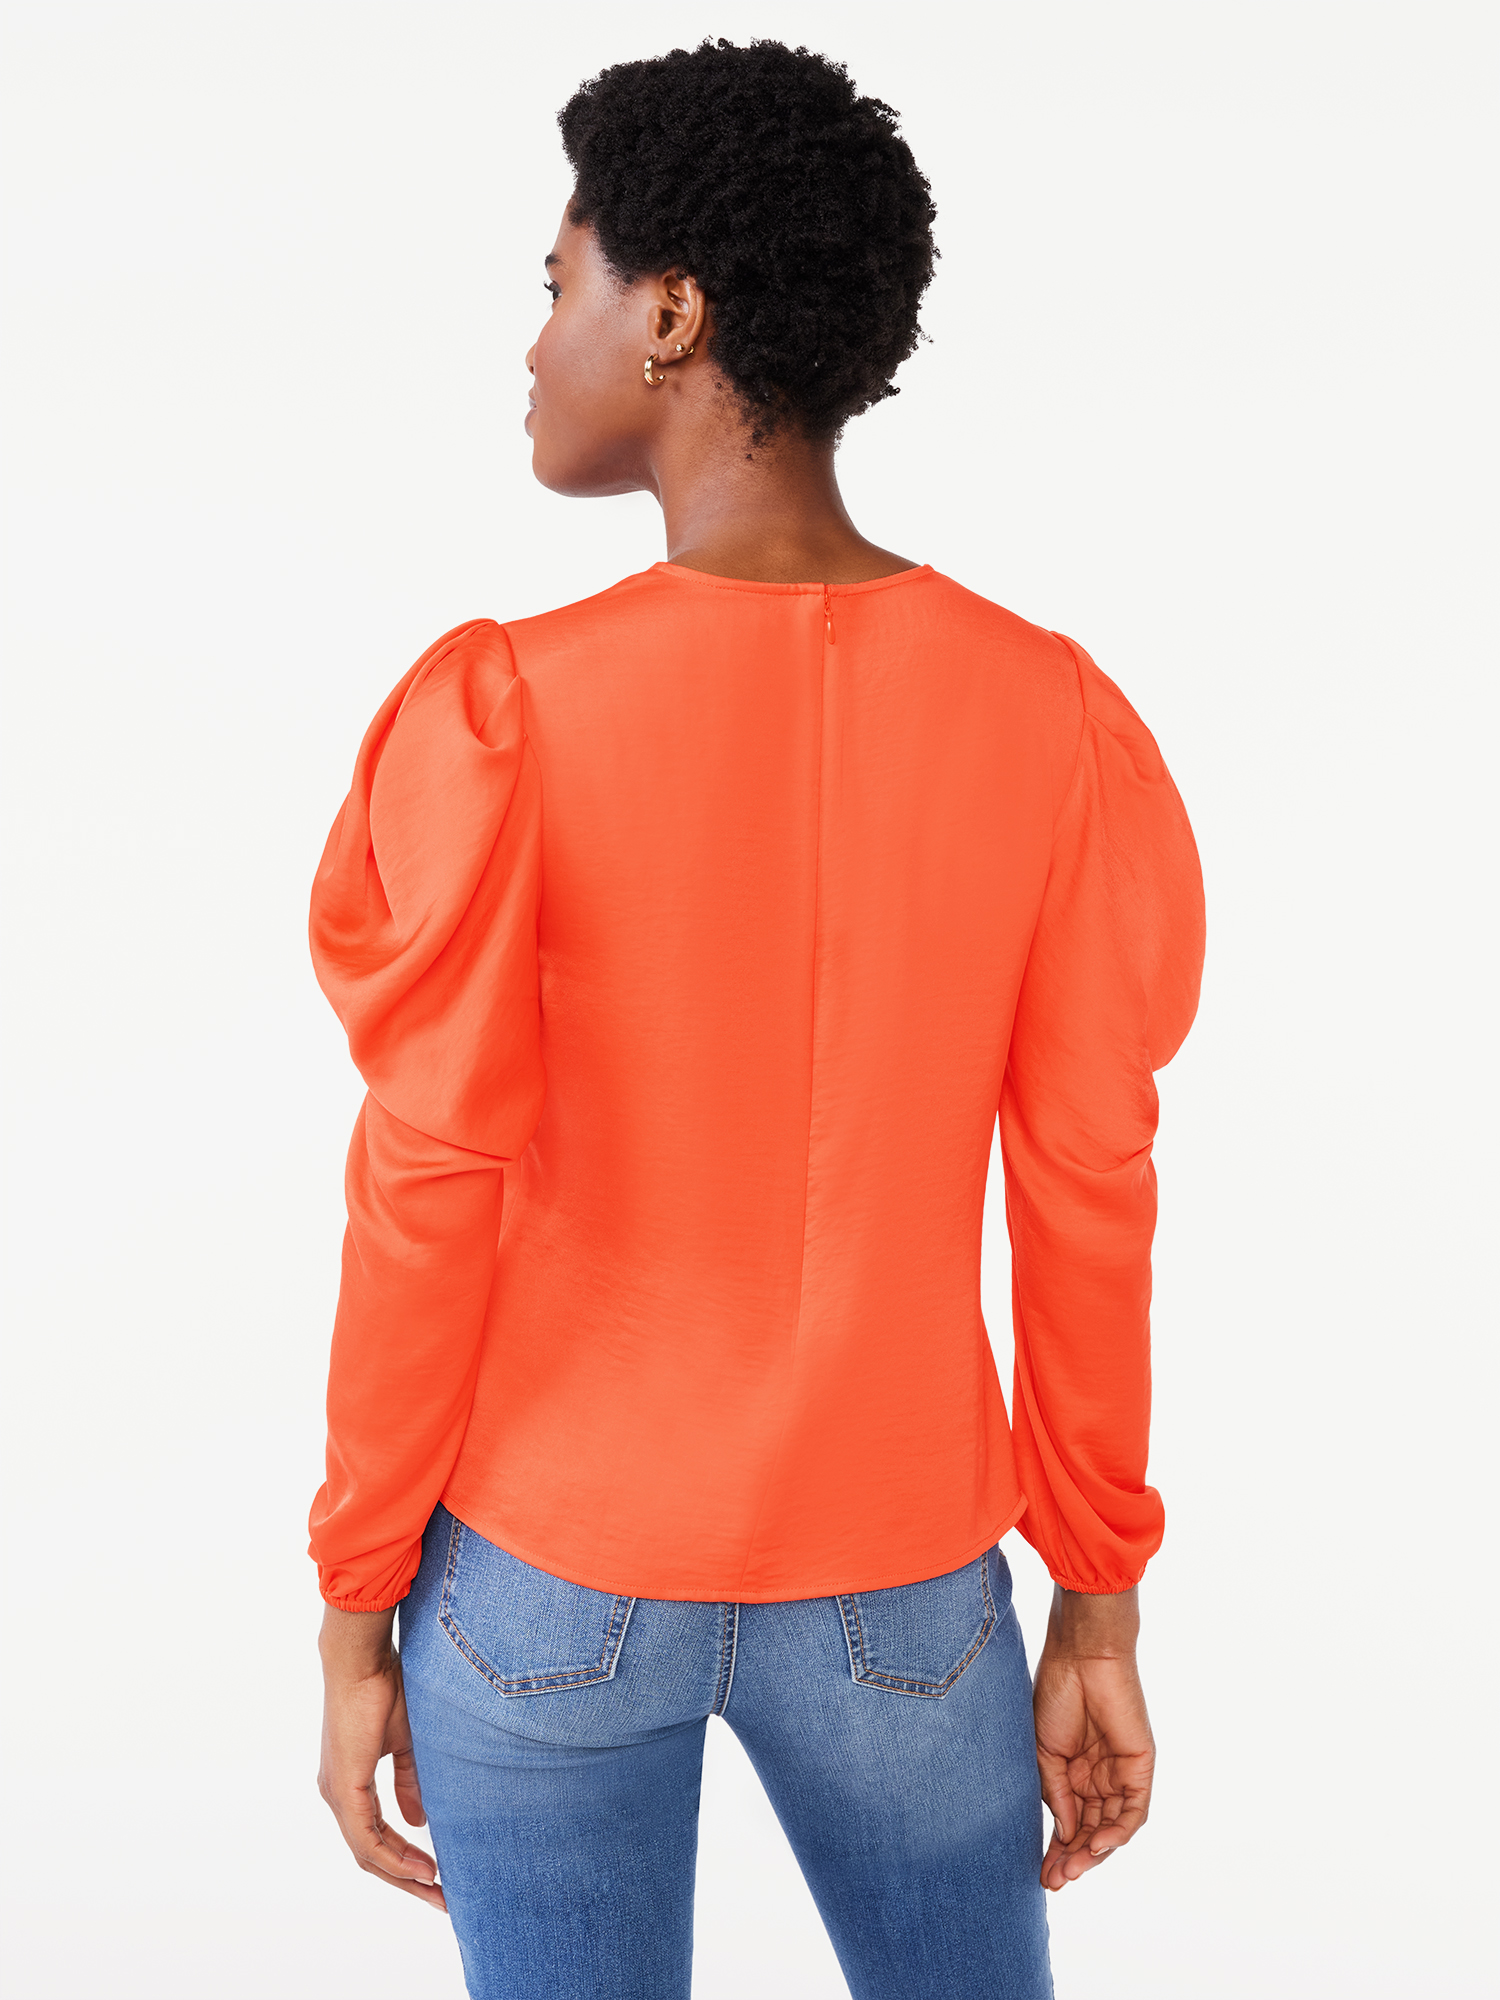 Scoop Women's Top with Blouson Sleeves, Sizes XS-XXL - image 3 of 5